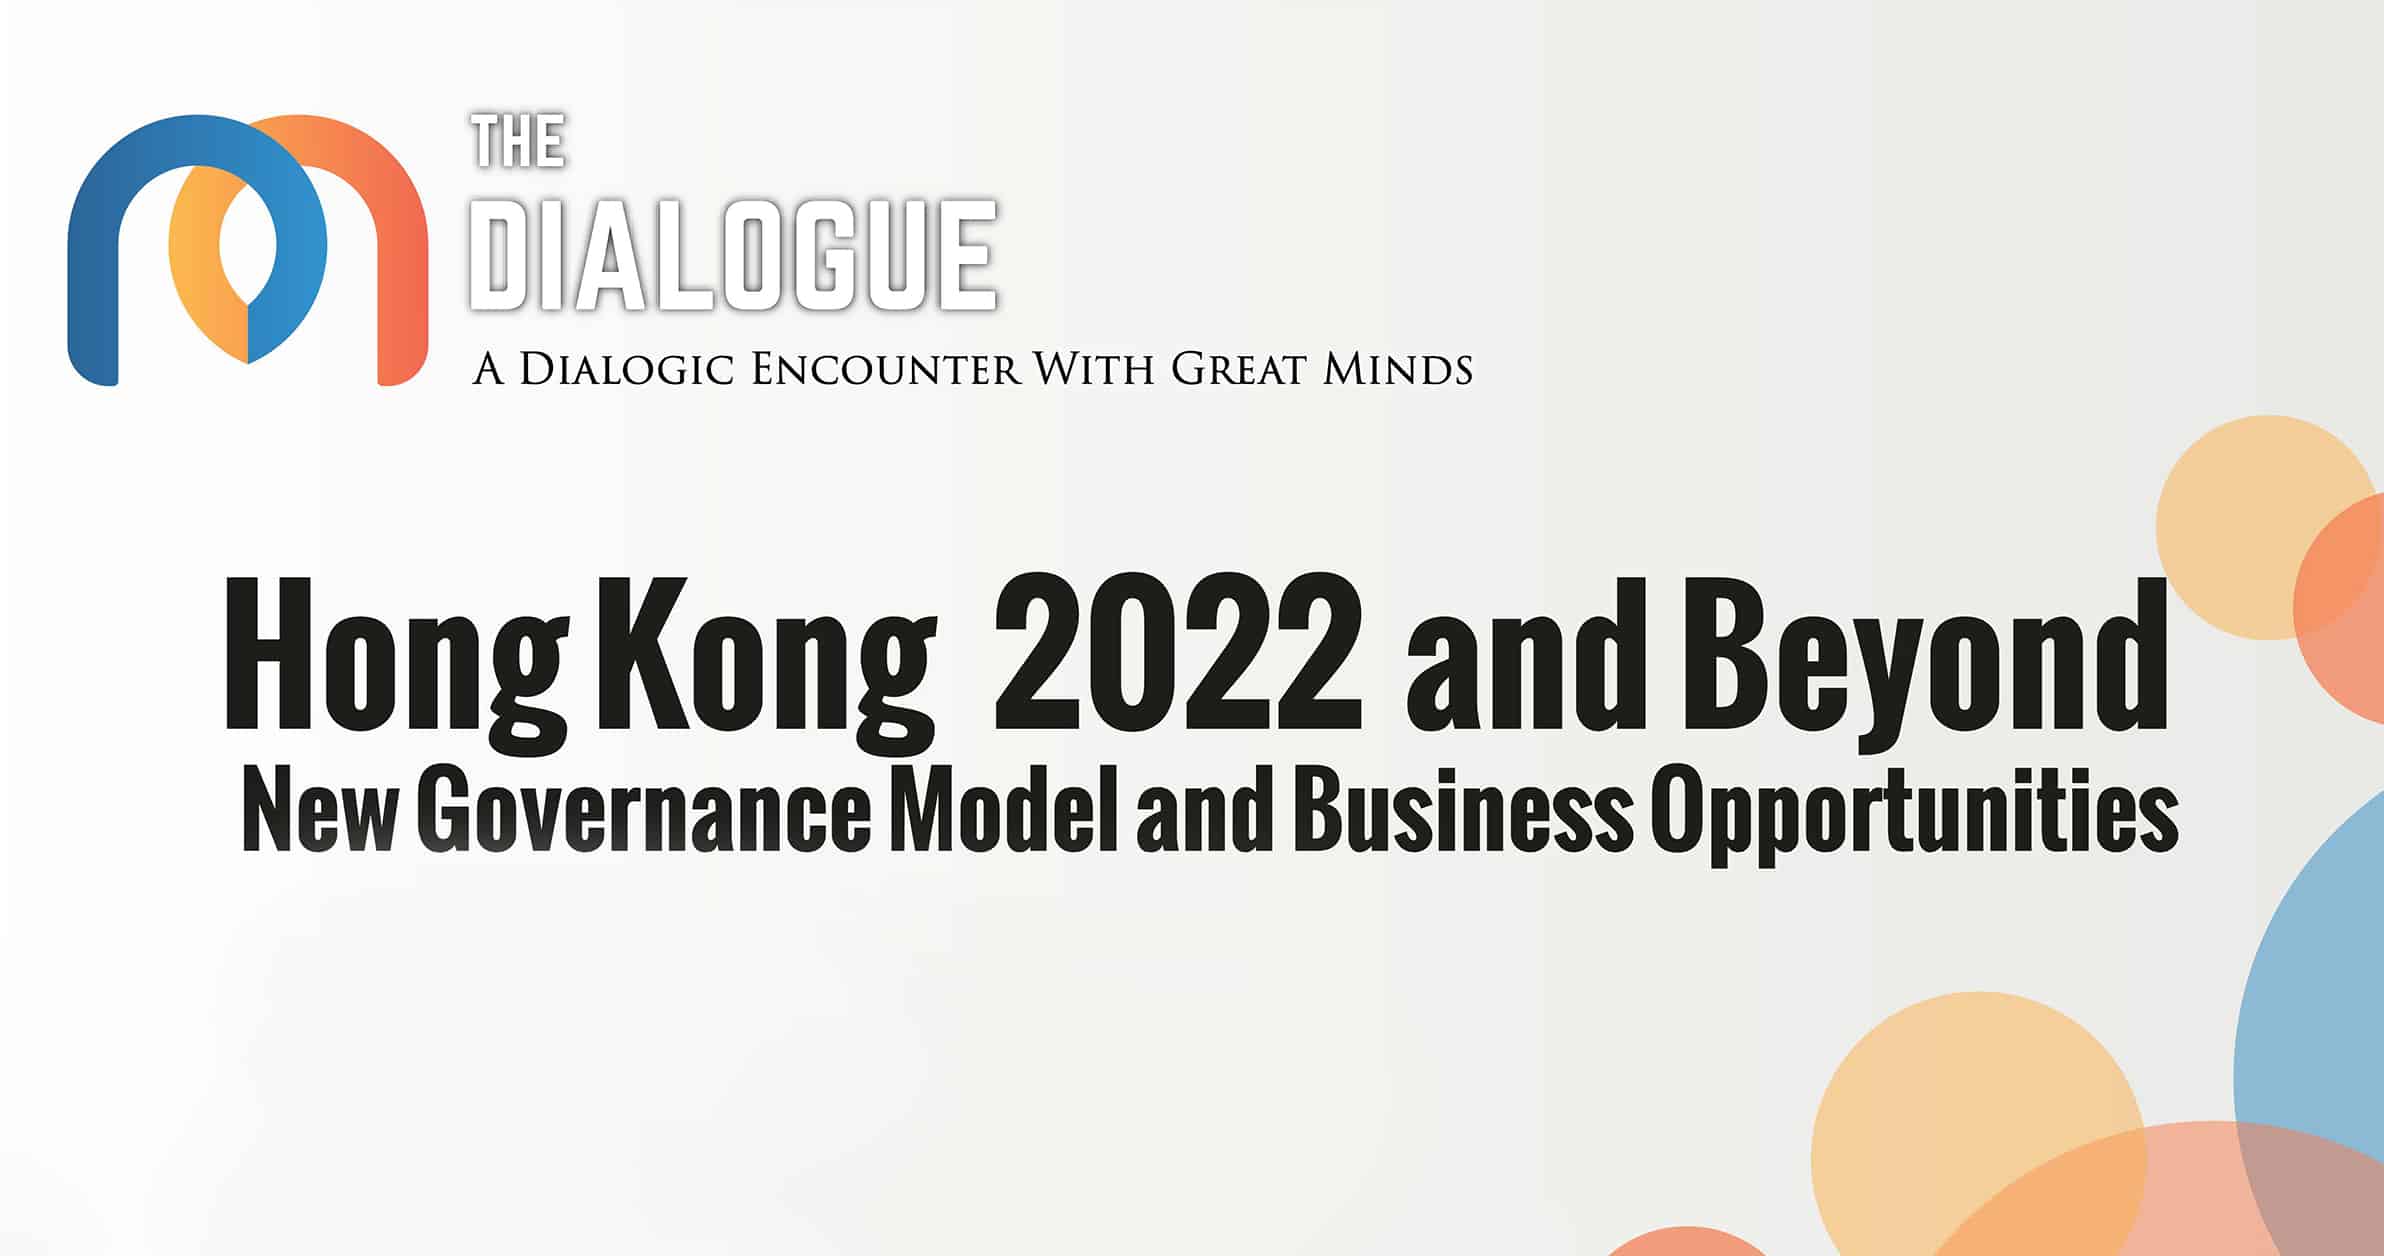 Hong Kong 2022 and Beyond: New Governance Model and Business Opportunities